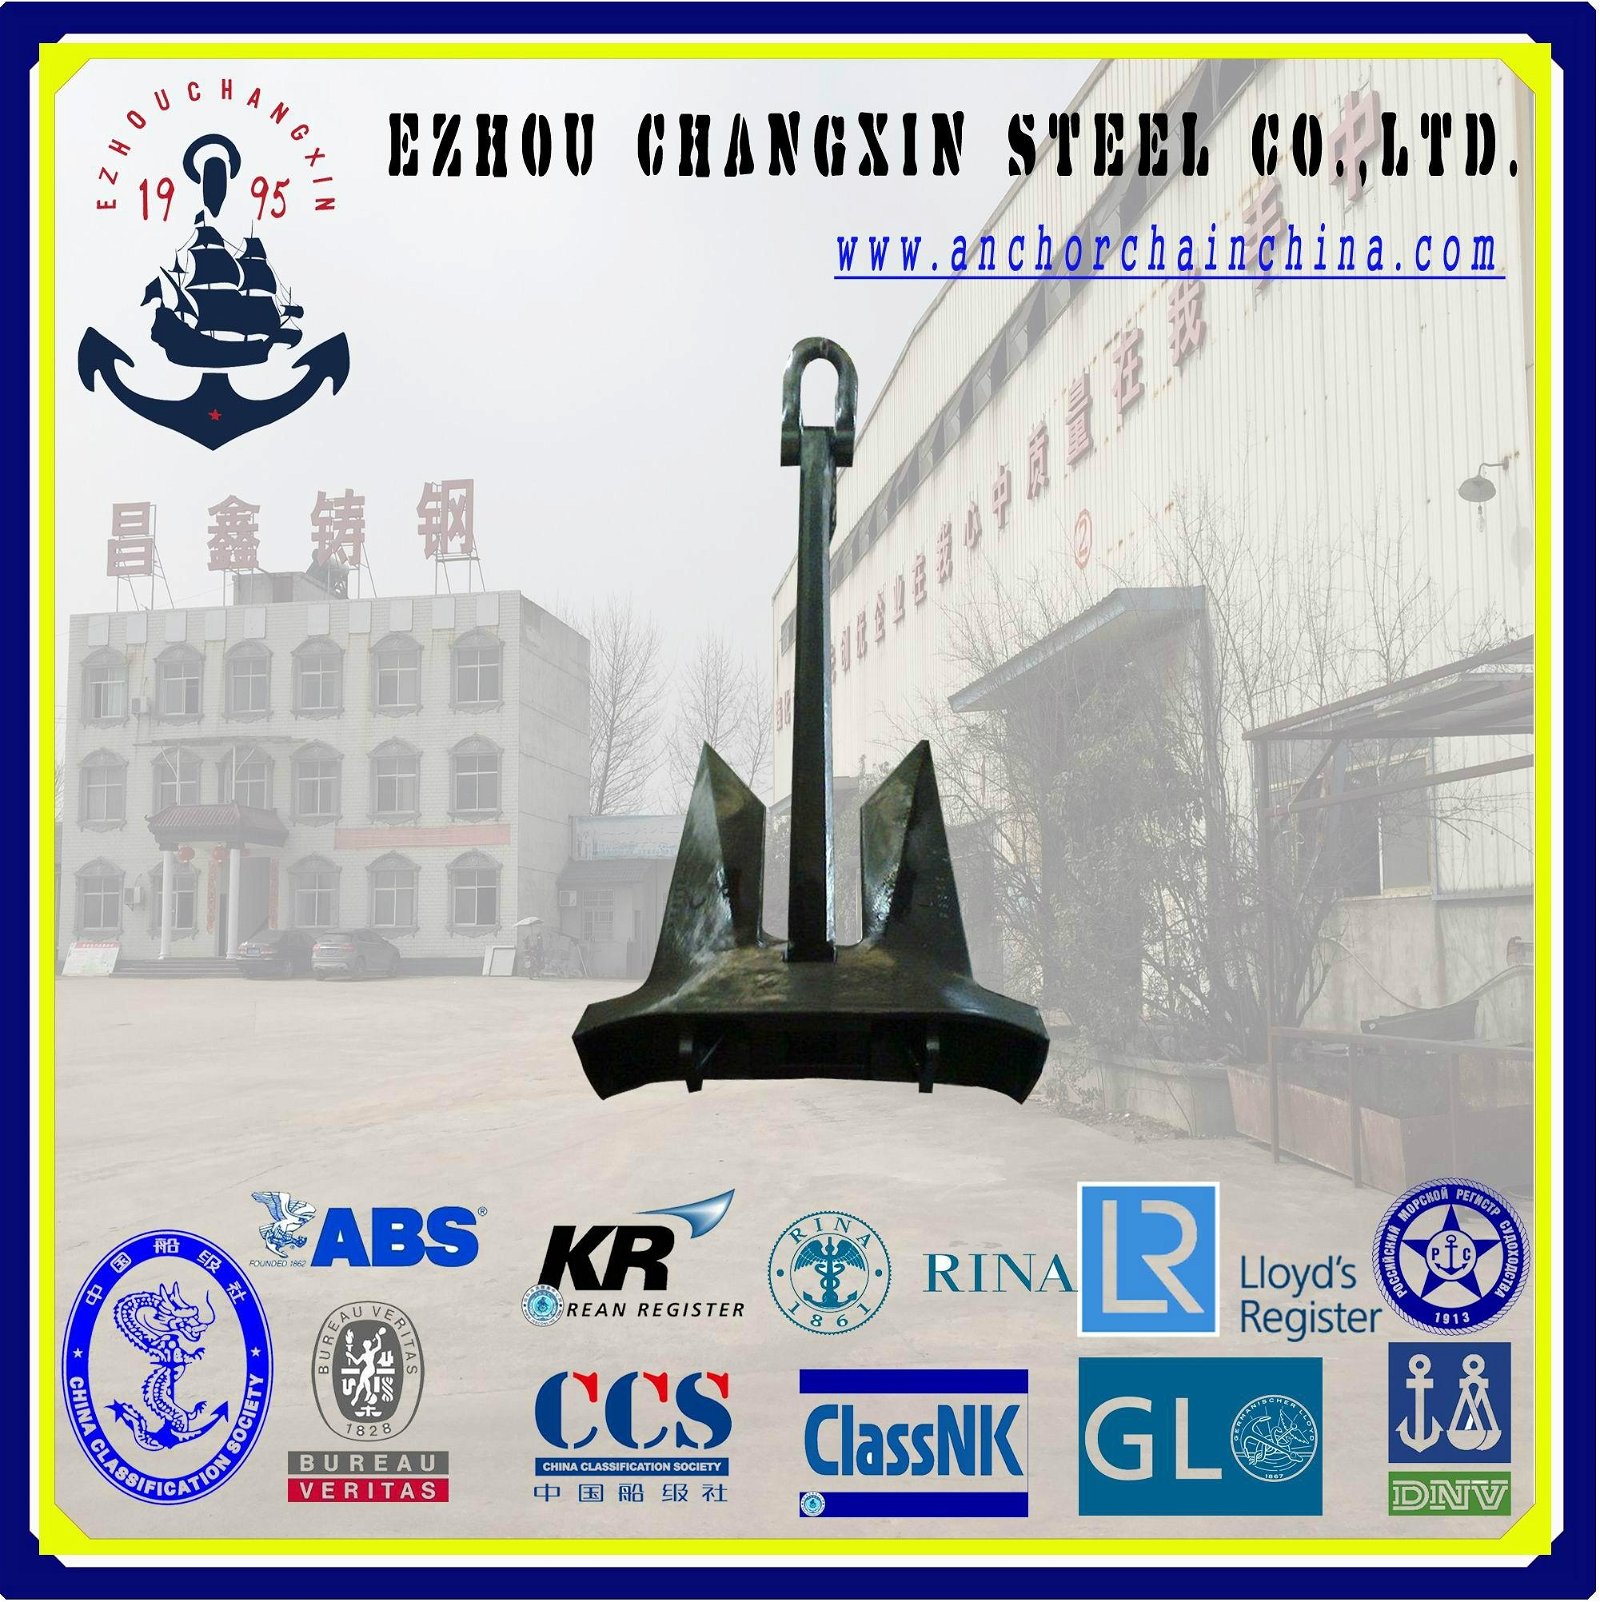 The worldsale anchor service AC-14 HHP STOCKLESS MARINE ANCHOR    with delivery  4